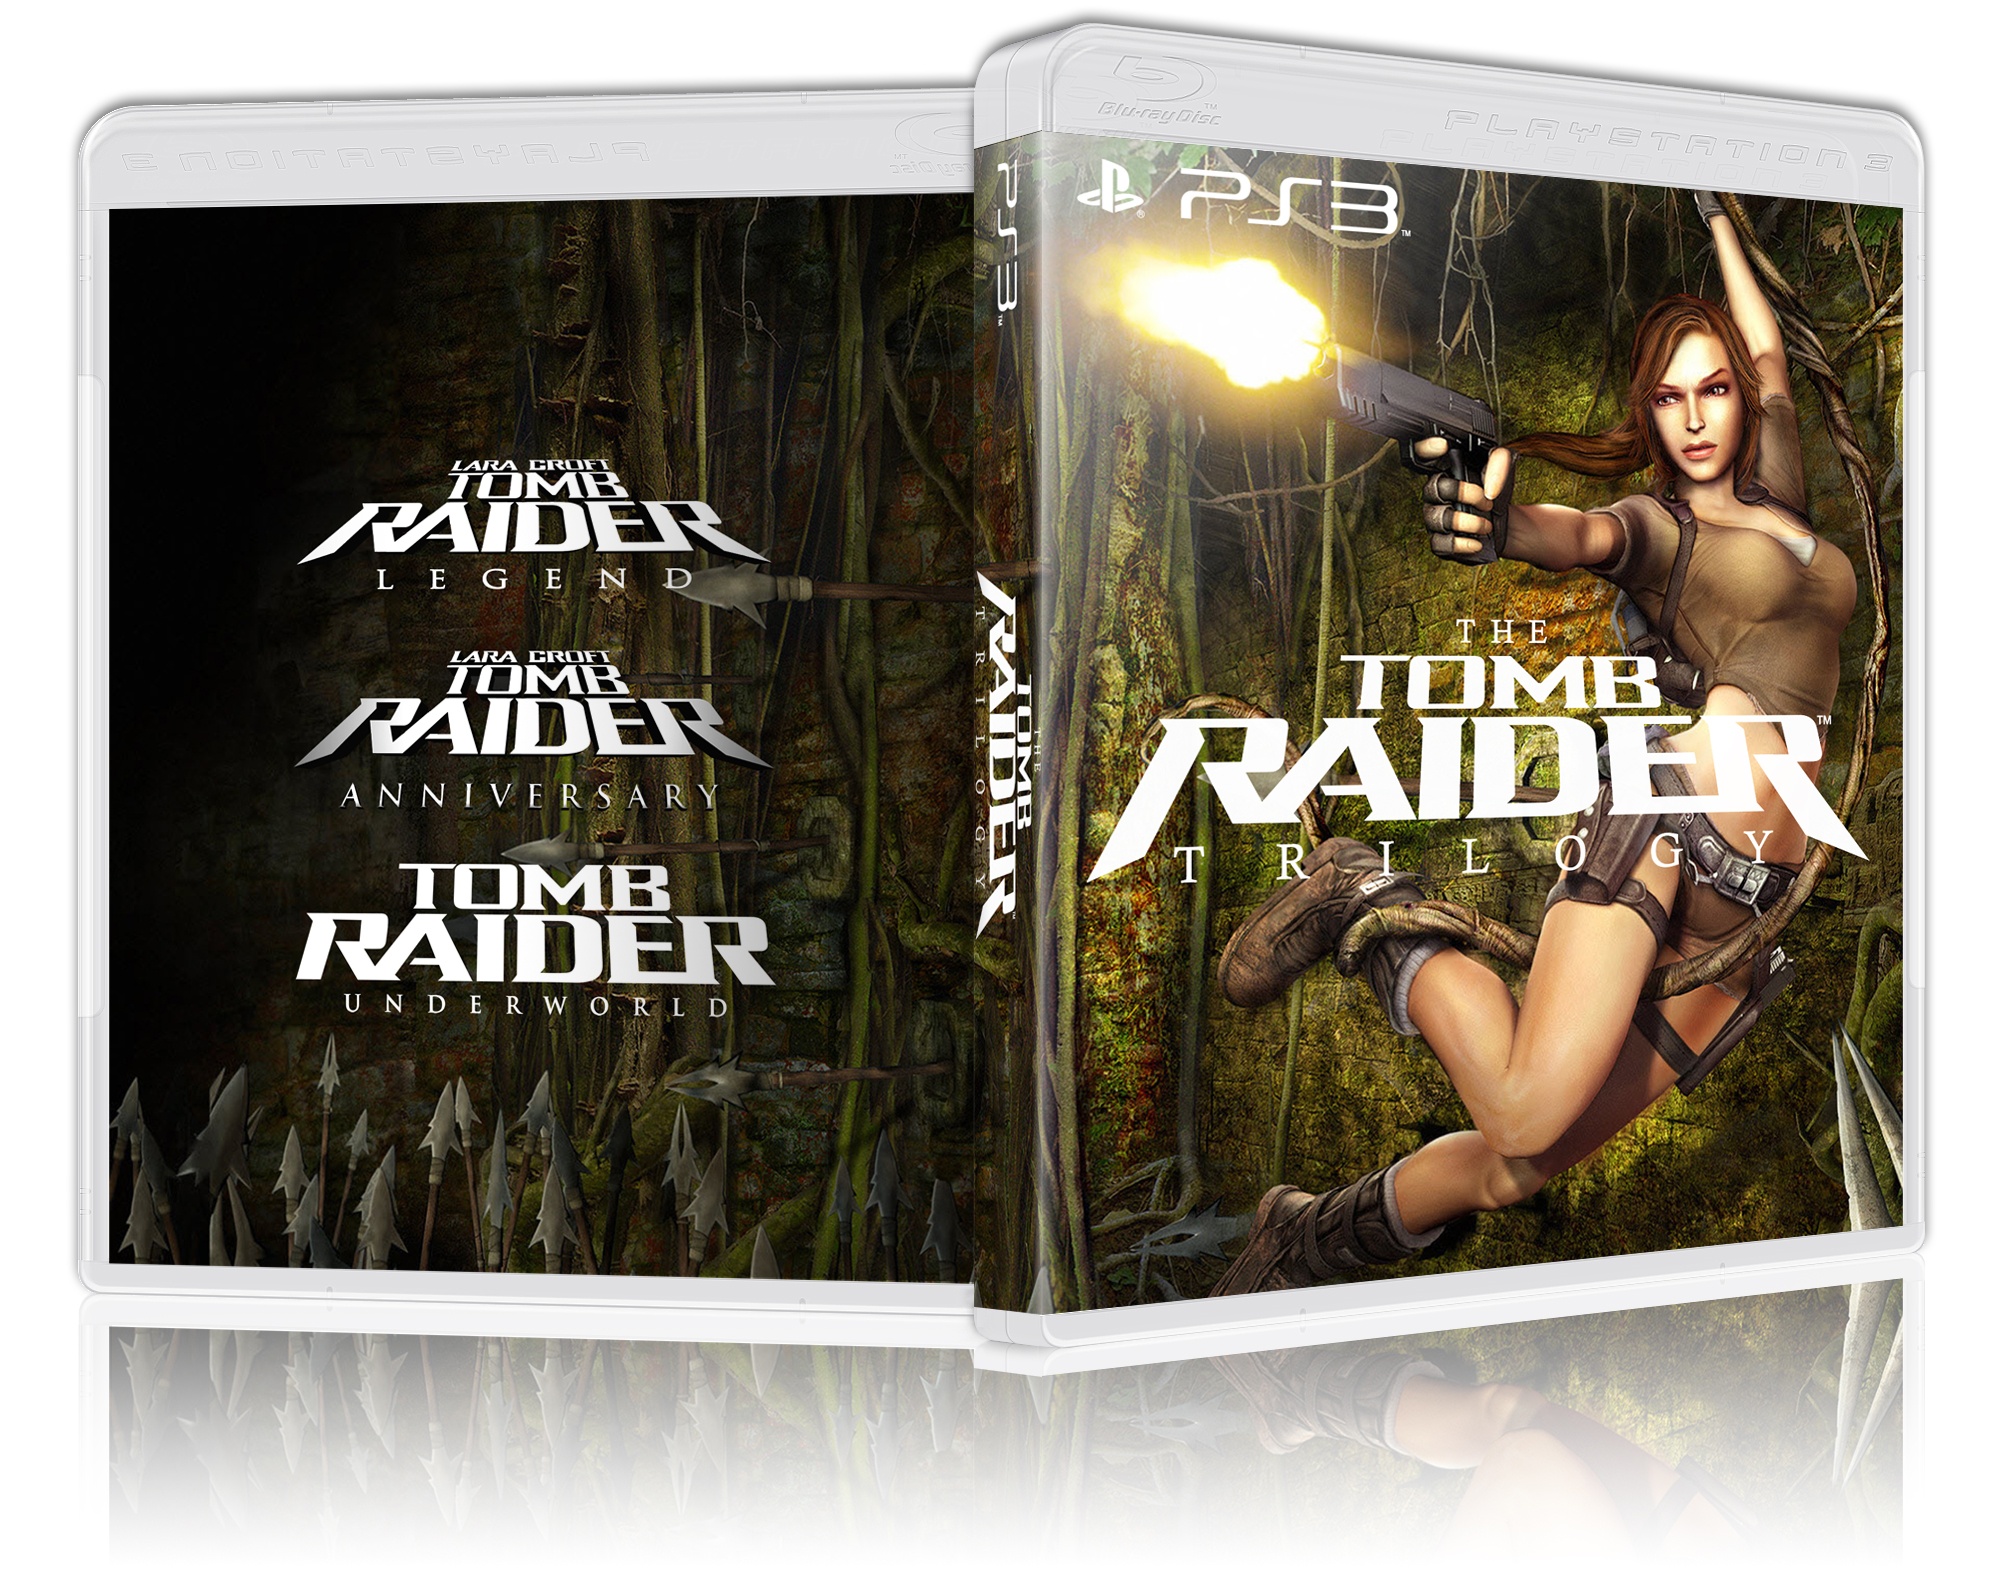 The Tomb Raider Trilogy box cover